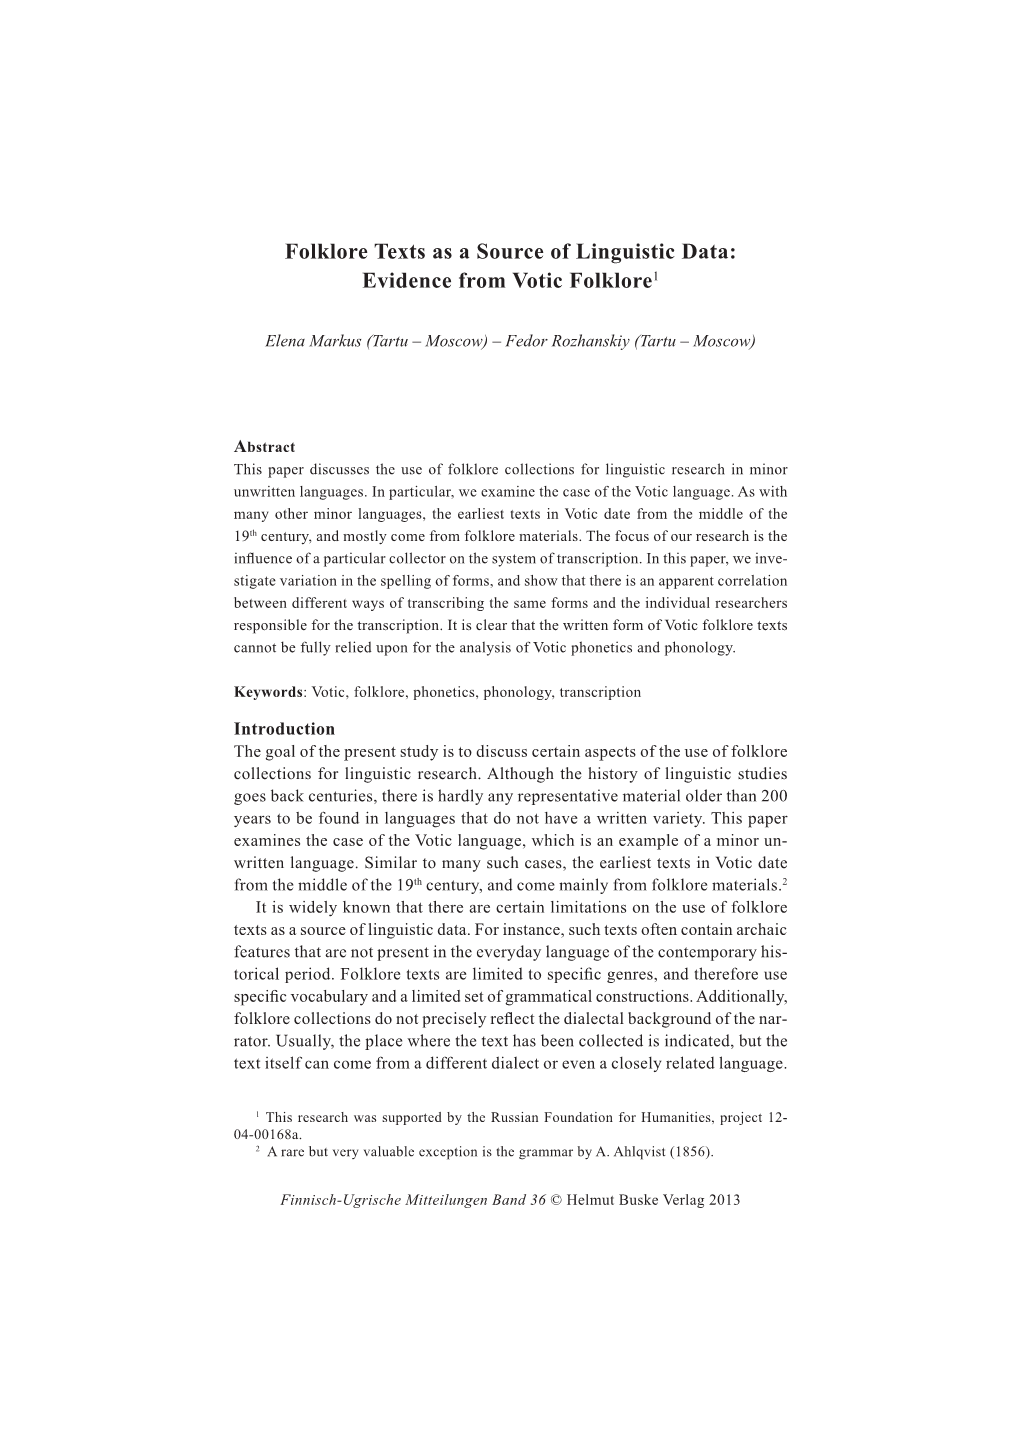 Folklore Texts As a Source of Linguistic Data: Evidence from Votic Folklore1